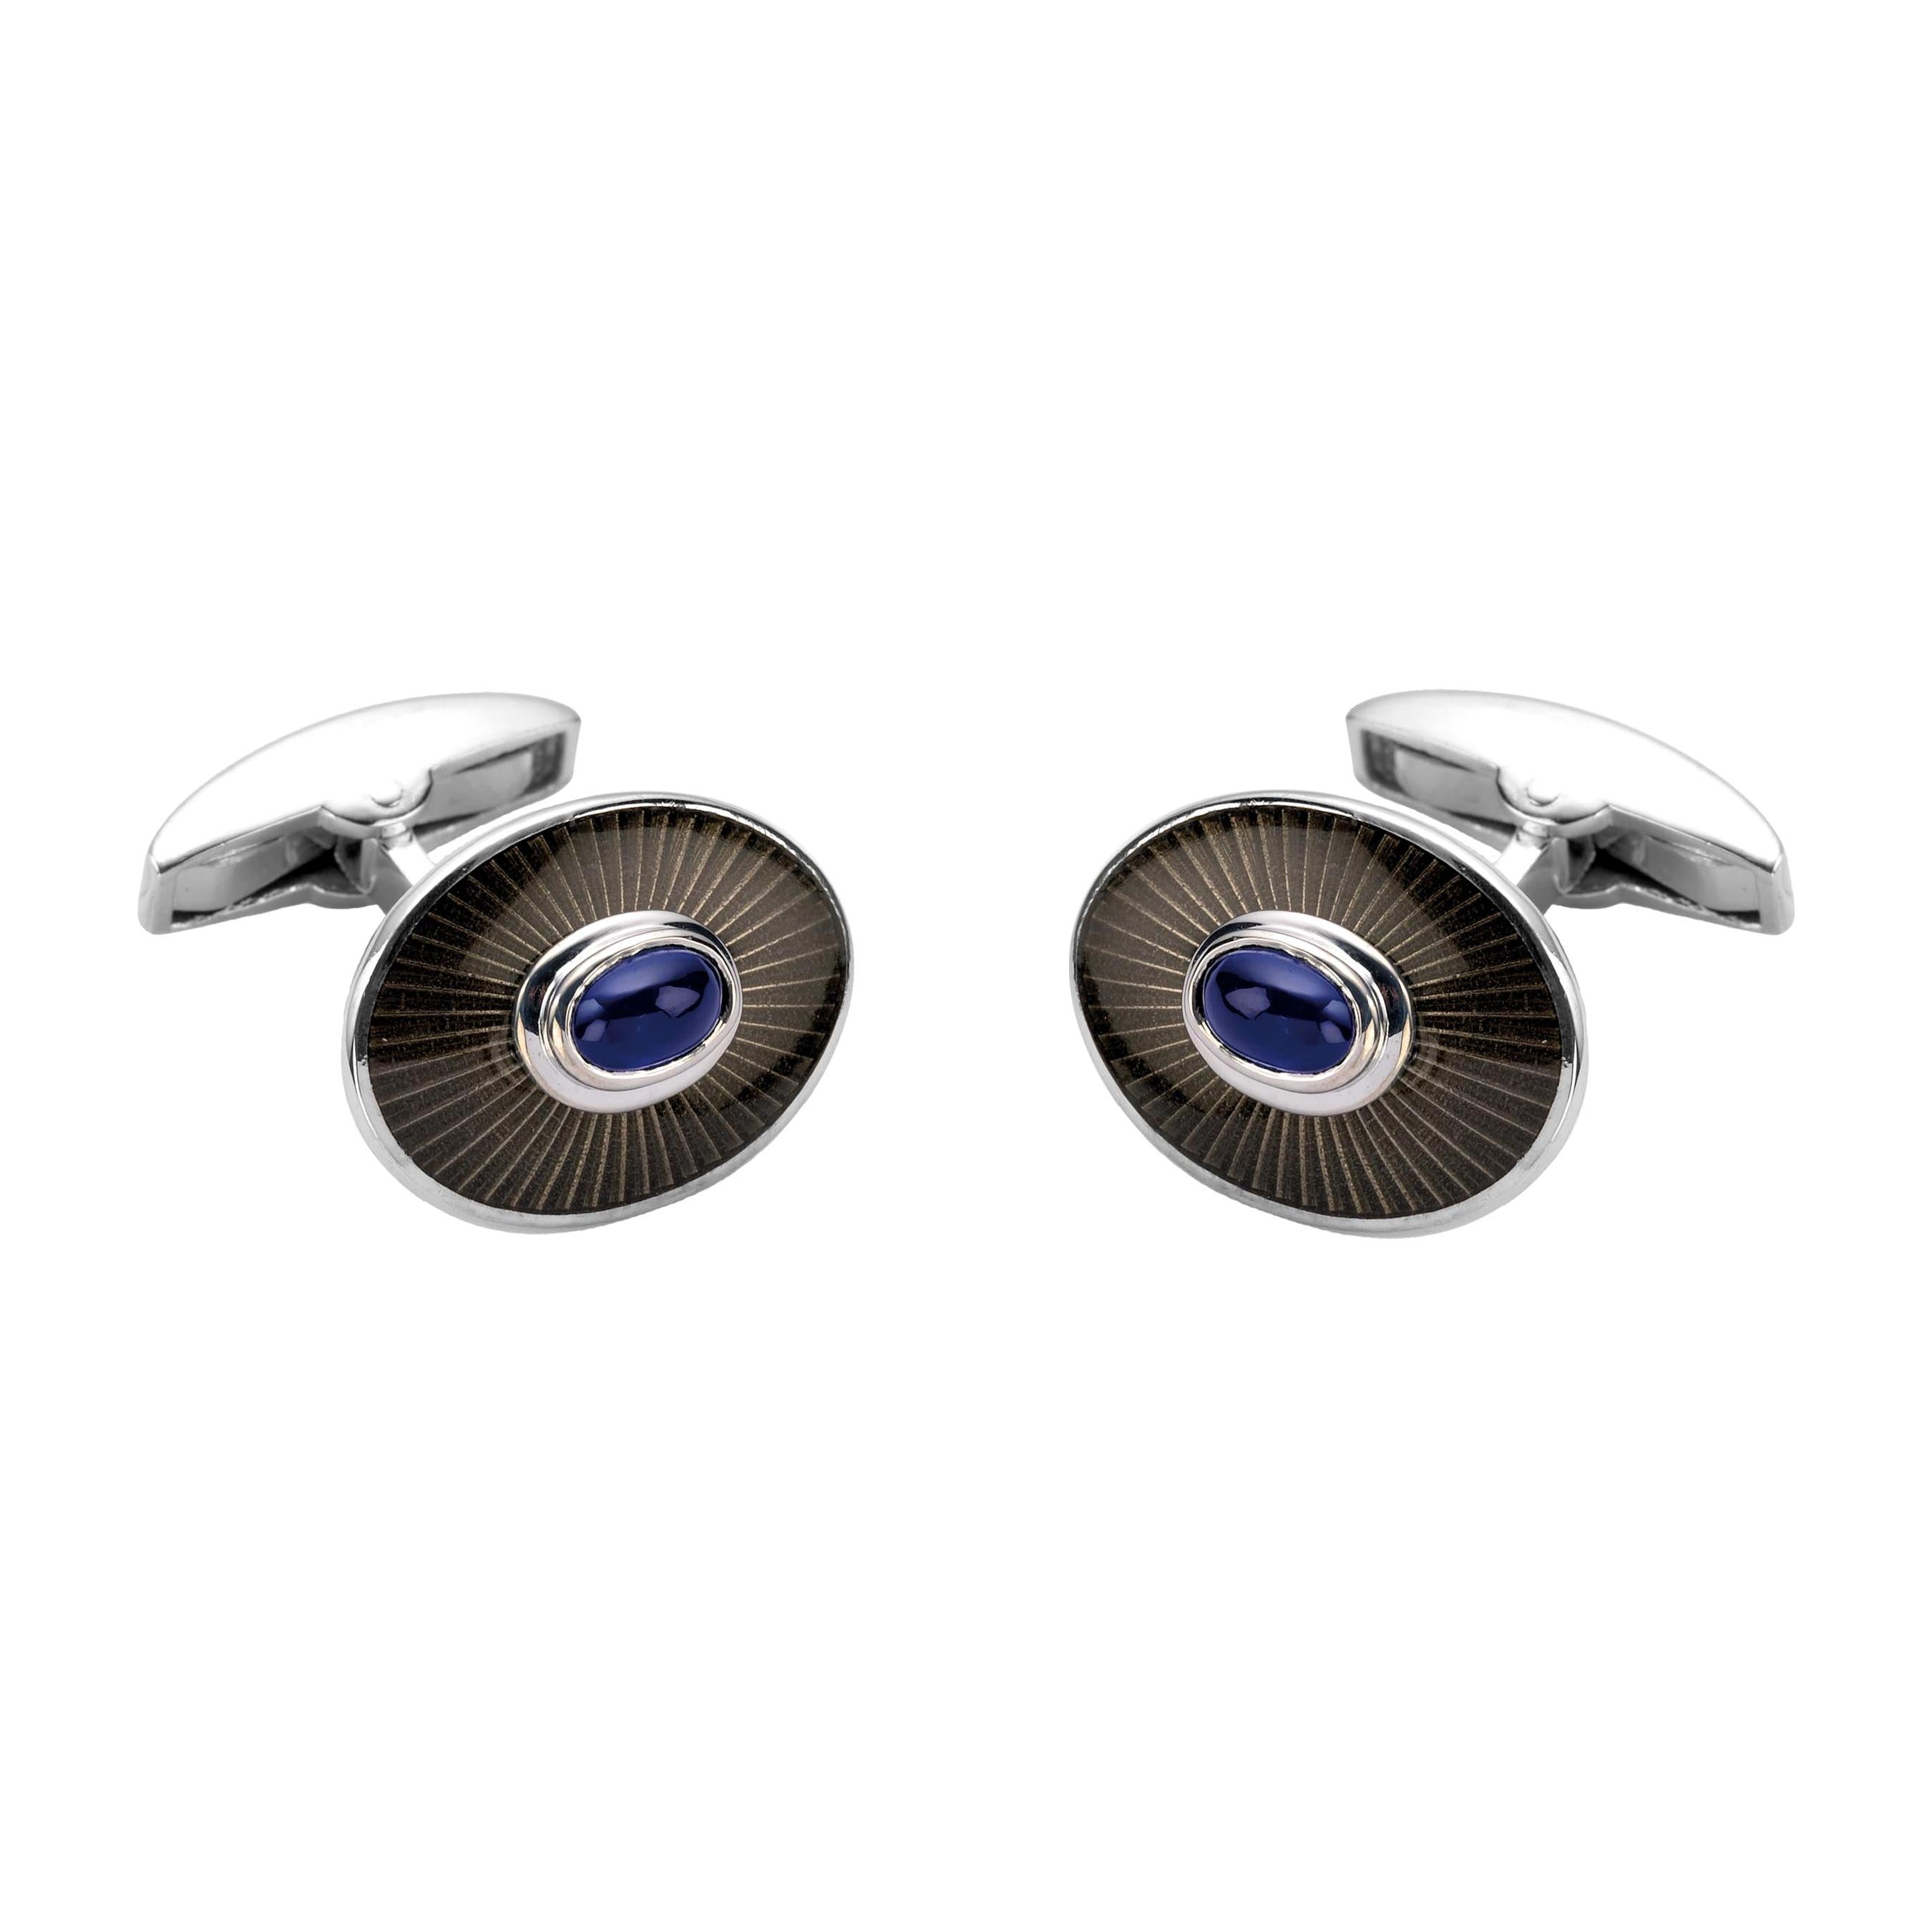 Deakin & Francis 18ct White Gold Enamel Cufflinks with Sapphire Cabochon Centre